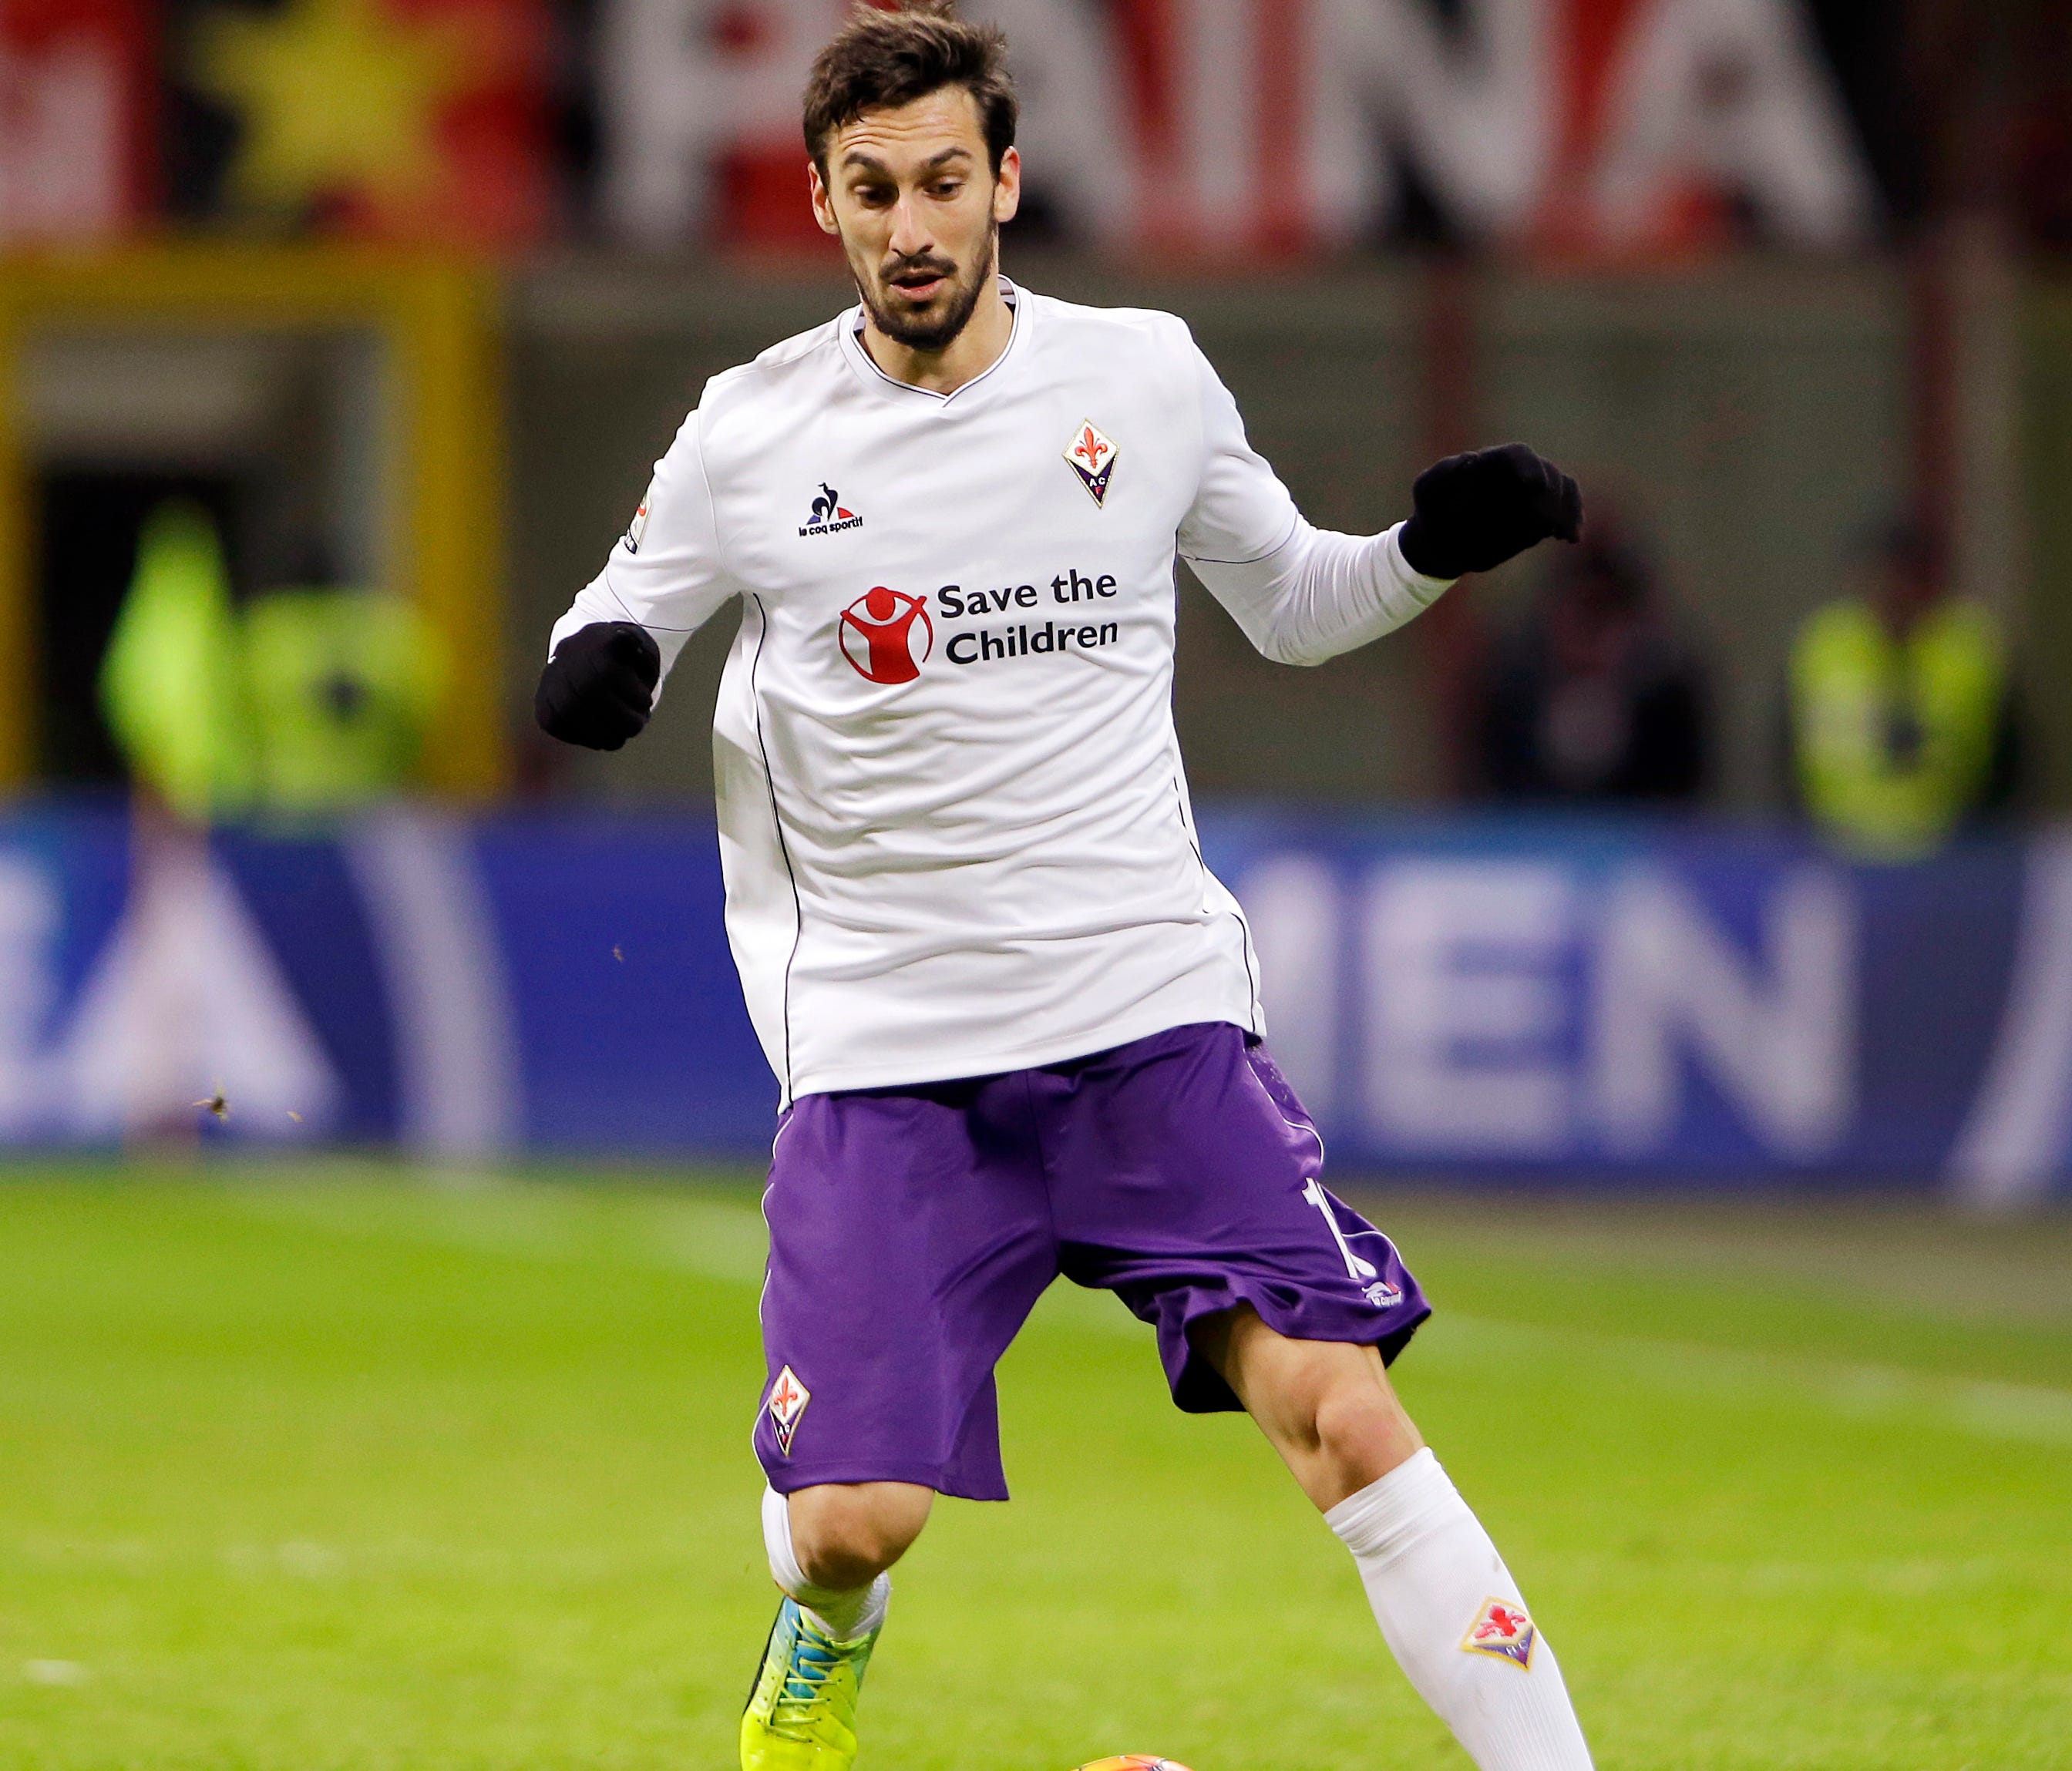 FILE - In this Sunday, Jan. 17, 2016 filer, Fiorentina's Davide Astori goes for the ball during the Serie A soccer match between AC Milan and Fiorentina at the San Siro stadium in Milan, Italy. Fiorentina captain Davide Astori has died, the club has 